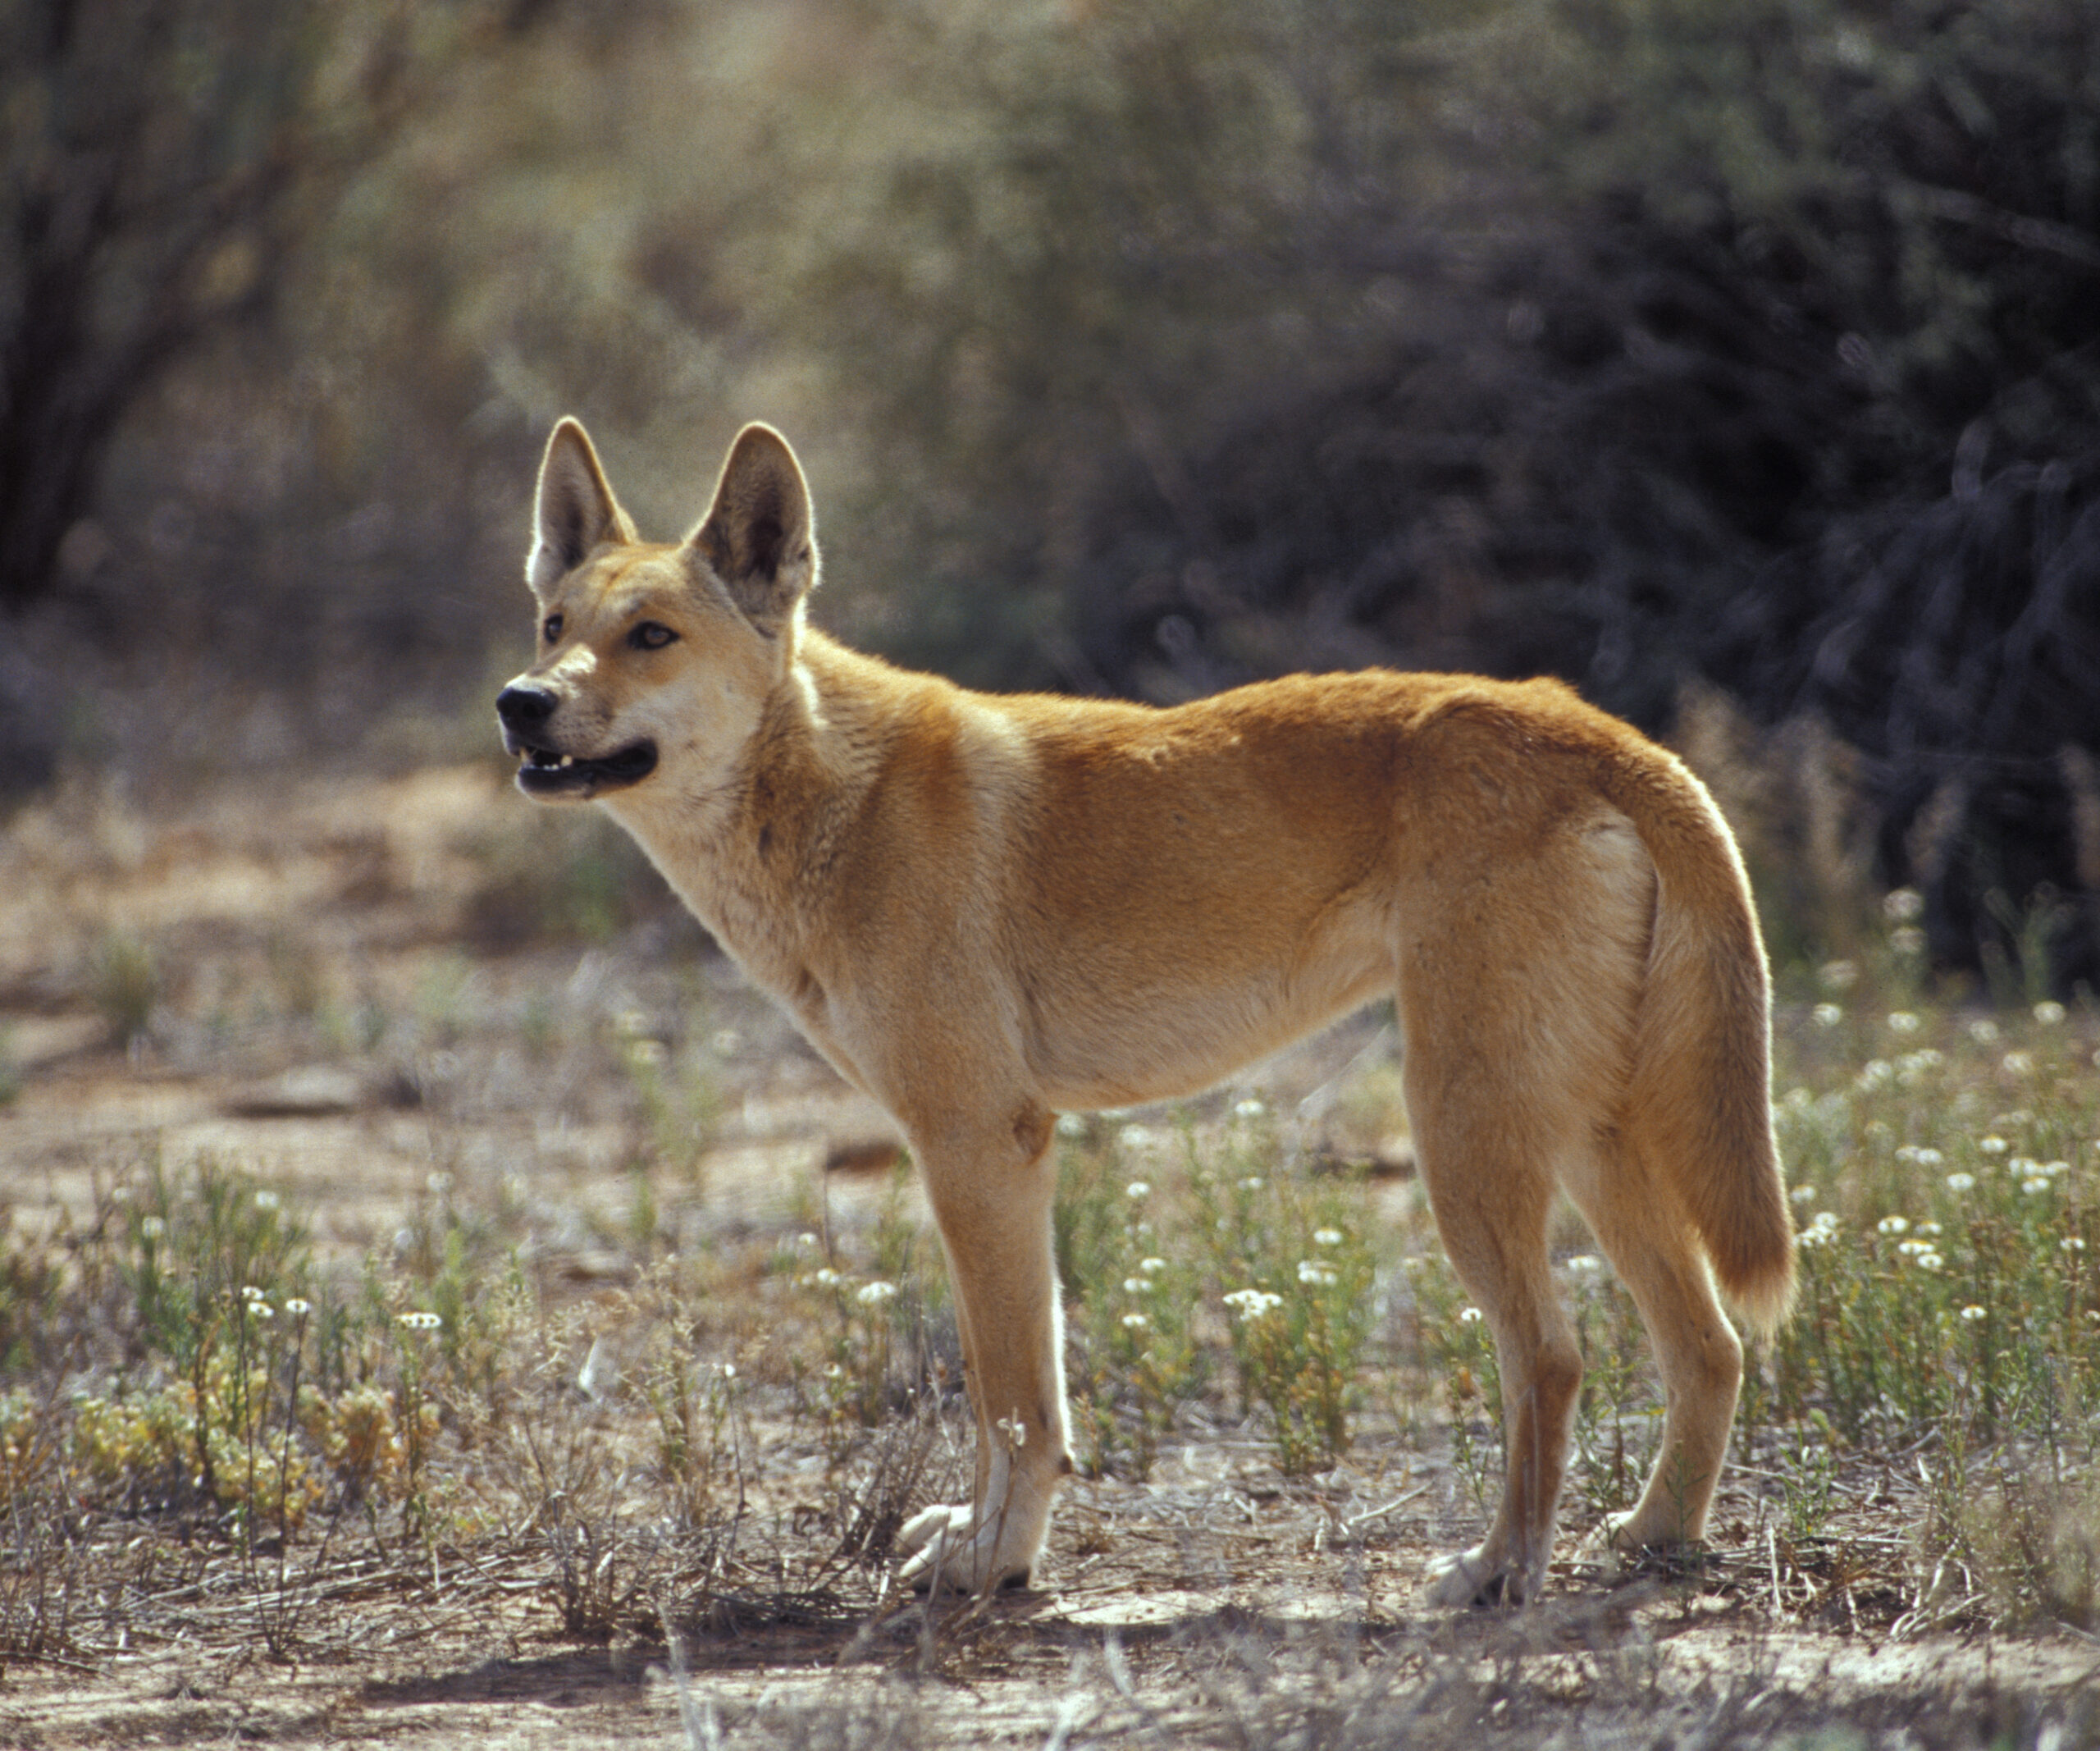 Dingo attempts to kidnap baby in WA